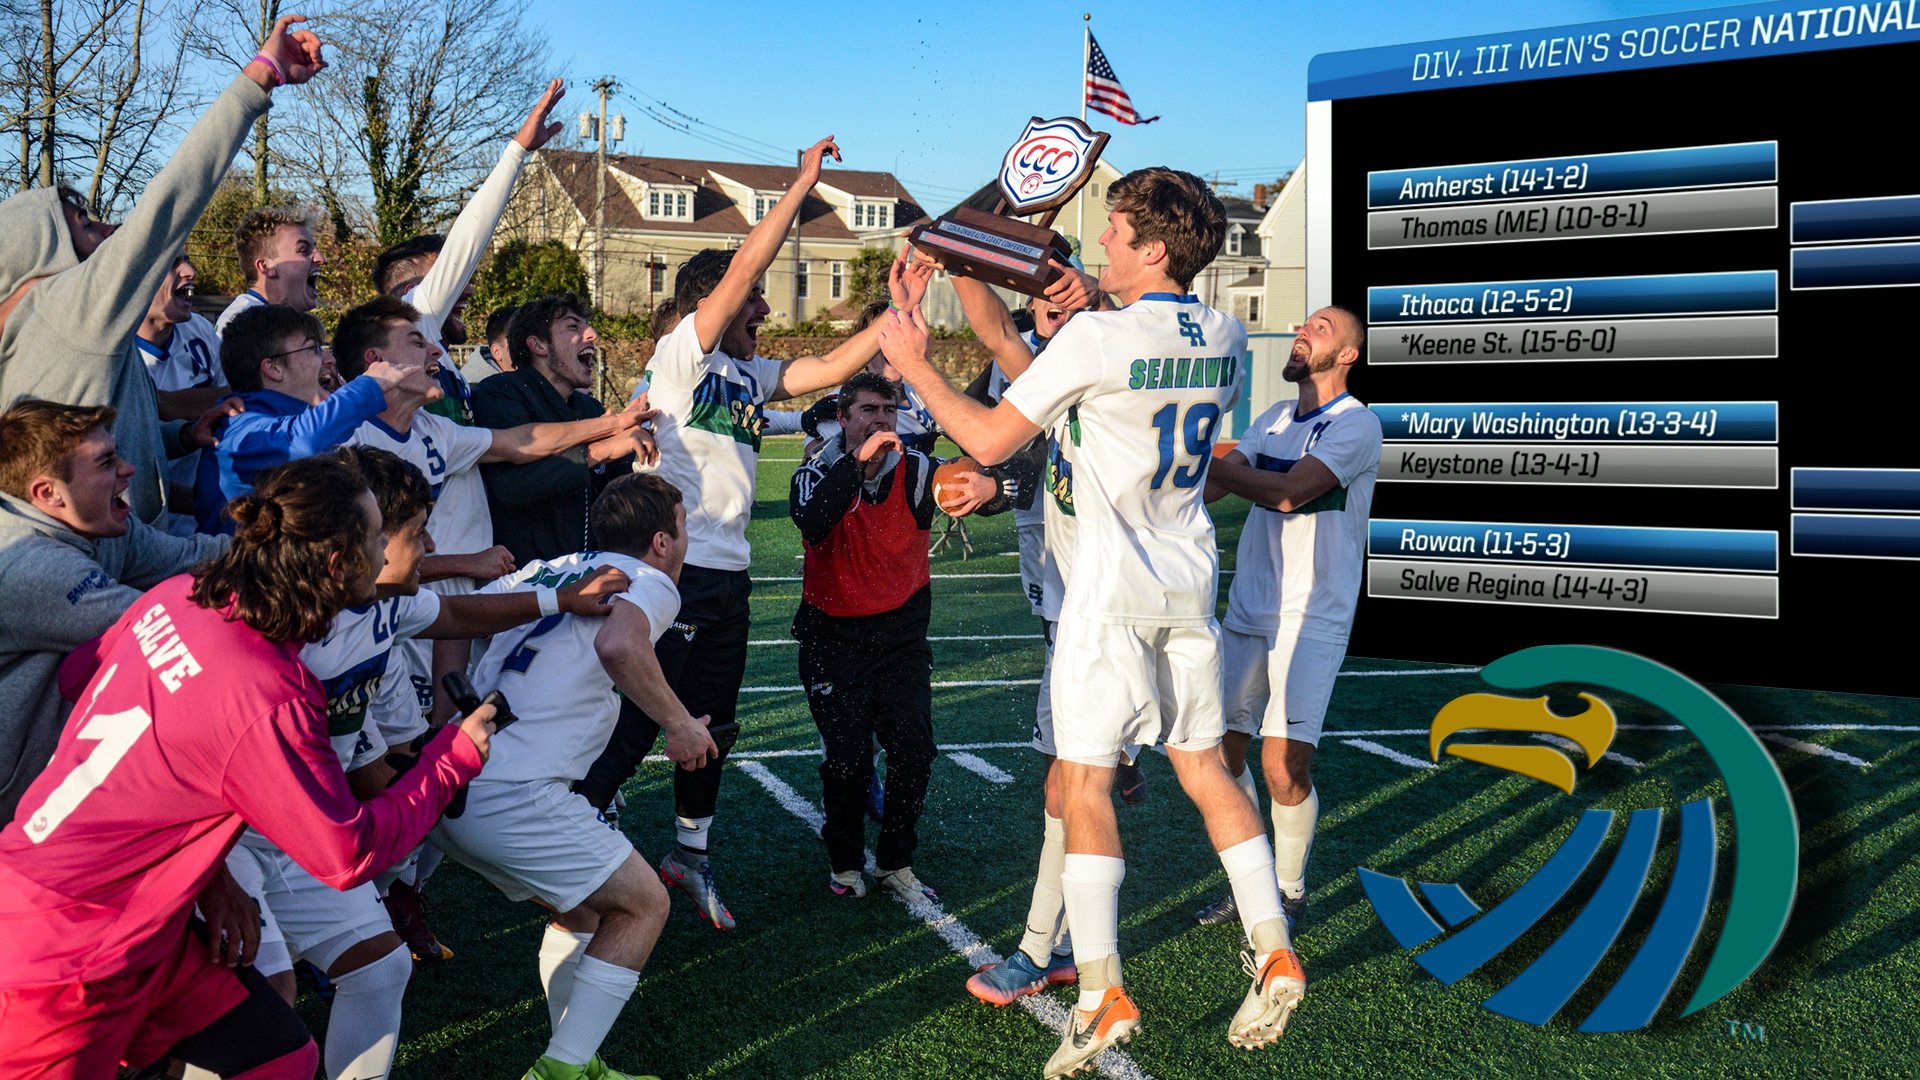 Salve Regina men's soccer faces Rowan for the first time in a First Round match of the 2019 NCAA Division III Men's Soccer Championship. The match will take place on Saturday, Nov. 16 at University of Mary Washington in Fredericksburg, Va. (Photo by George Corrigan)